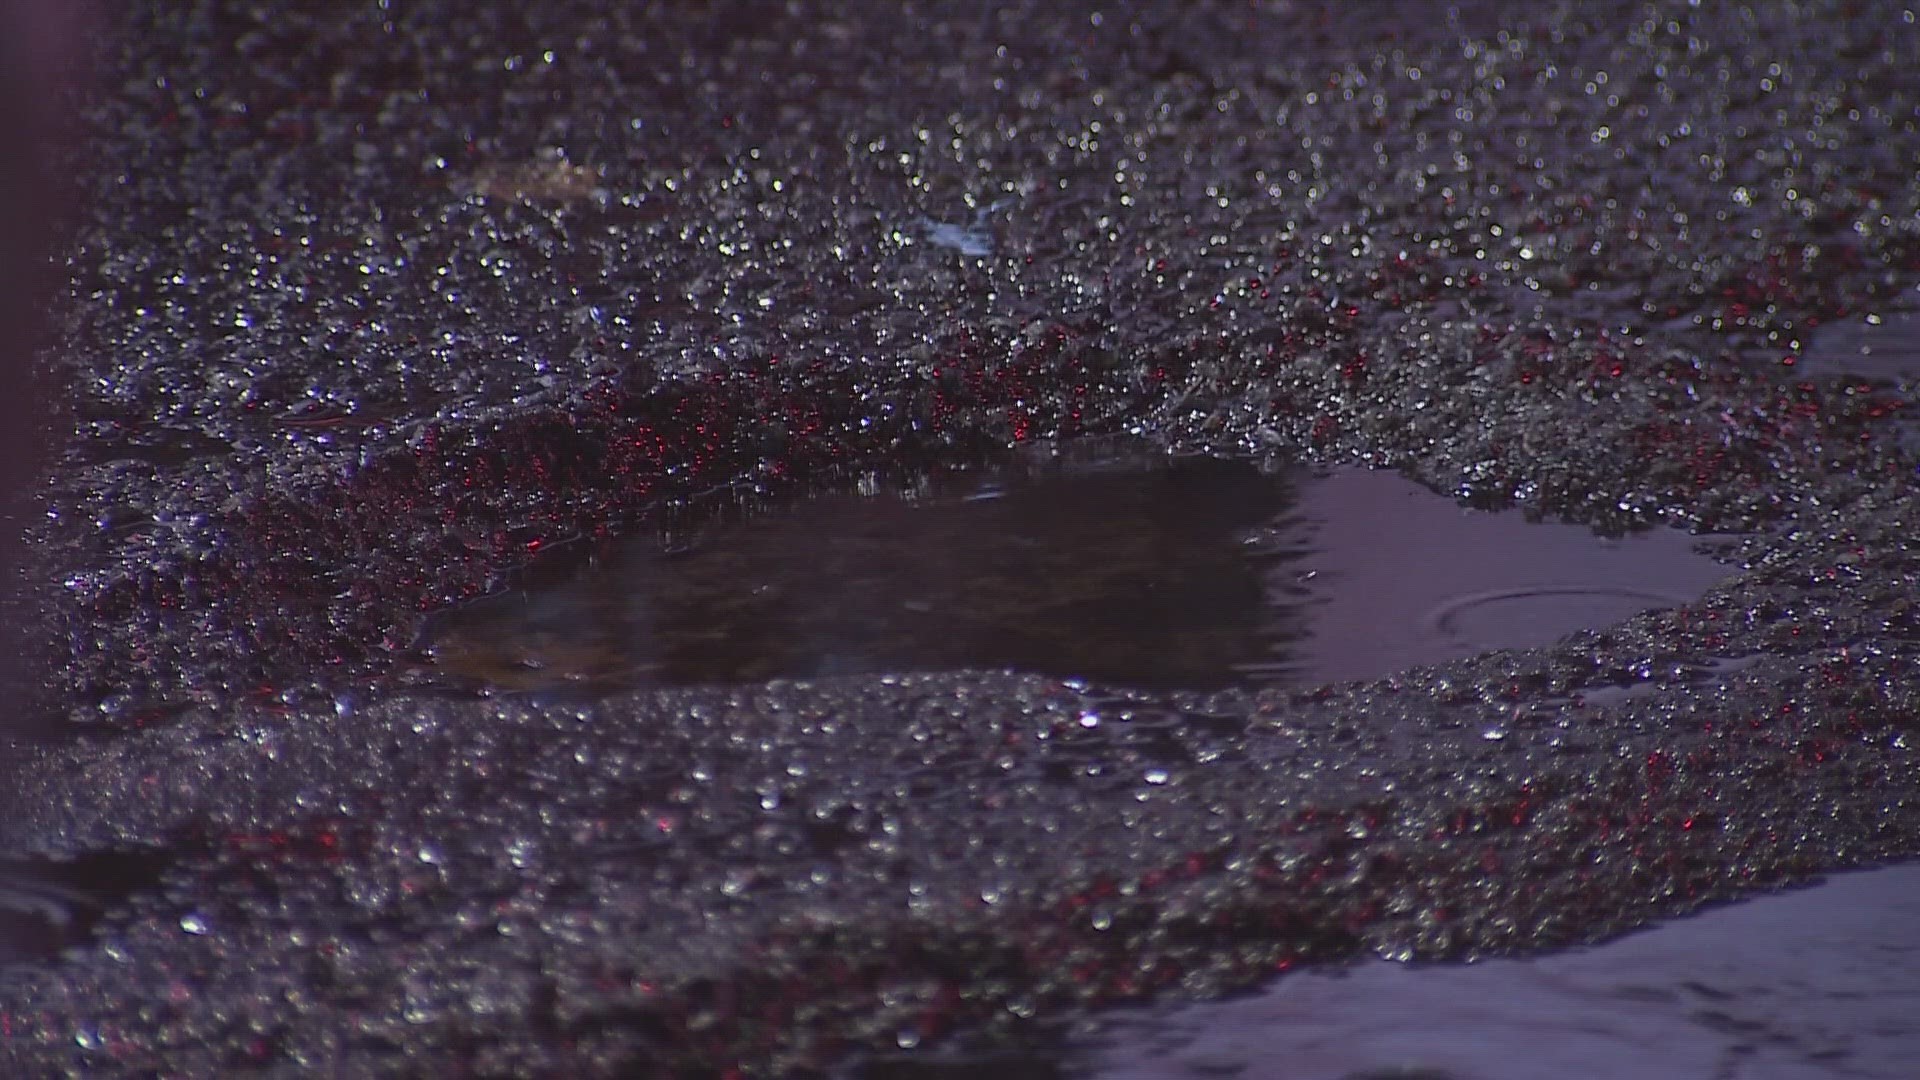 Seattle ranks ninth in the U.S. as the city with the worst potholes, following Yakima in seventh place and Spokane in sixth, the report states.